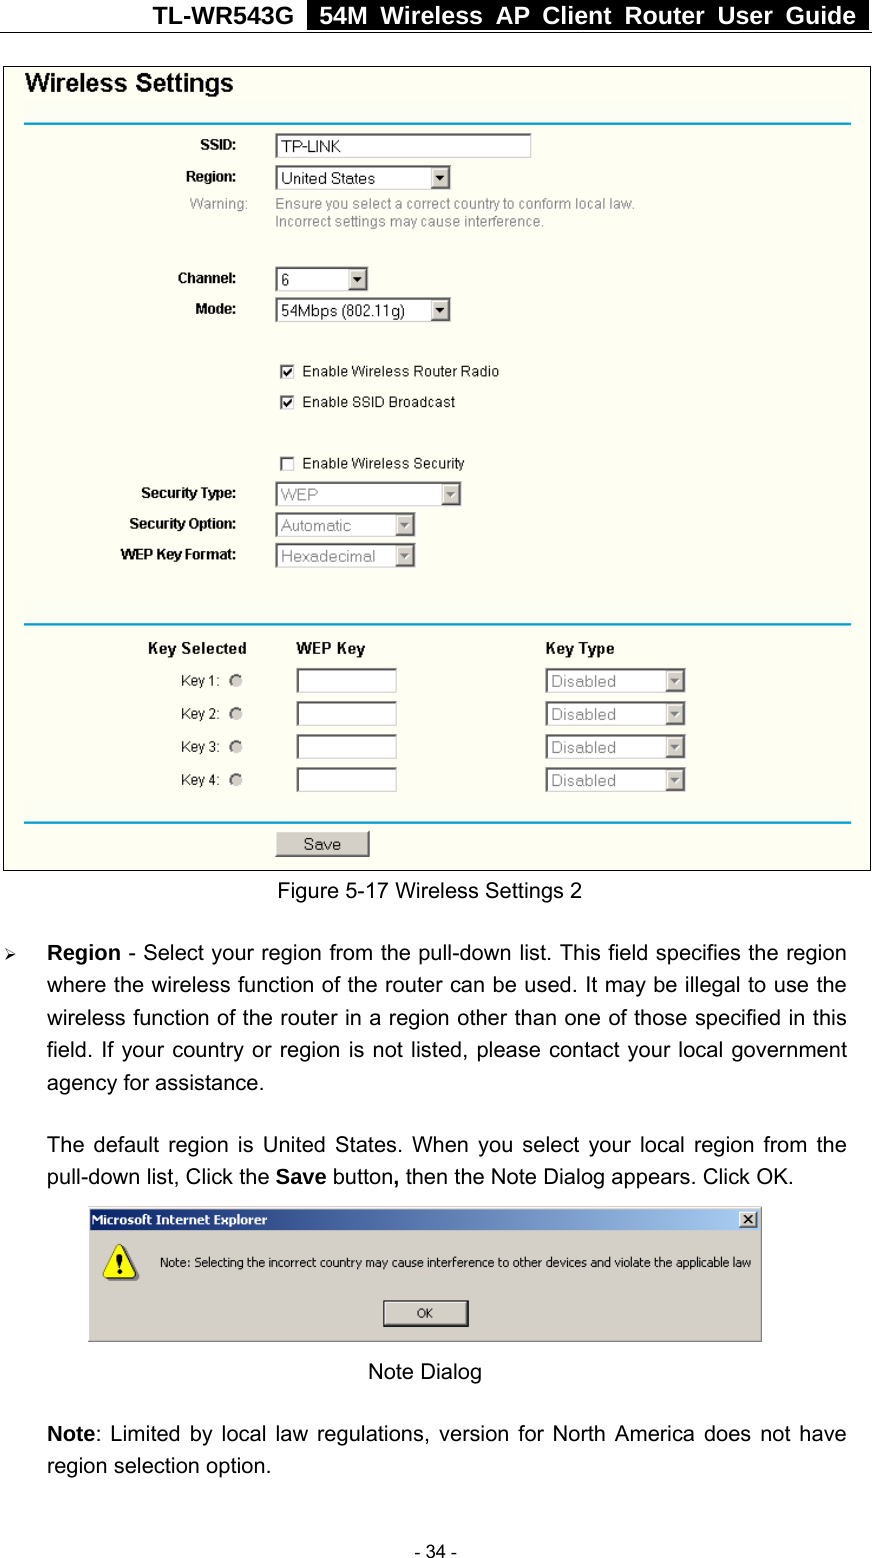 TL-WR543G   54M Wireless AP Client Router User Guide   Figure 5-17 Wireless Settings 2 ¾ Region - Select your region from the pull-down list. This field specifies the region where the wireless function of the router can be used. It may be illegal to use the wireless function of the router in a region other than one of those specified in this field. If your country or region is not listed, please contact your local government agency for assistance. The default region is United States. When you select your local region from the pull-down list, Click the Save button, then the Note Dialog appears. Click OK.  Note Dialog   Note: Limited by local law regulations, version for North America does not have region selection option.  - 34 - 